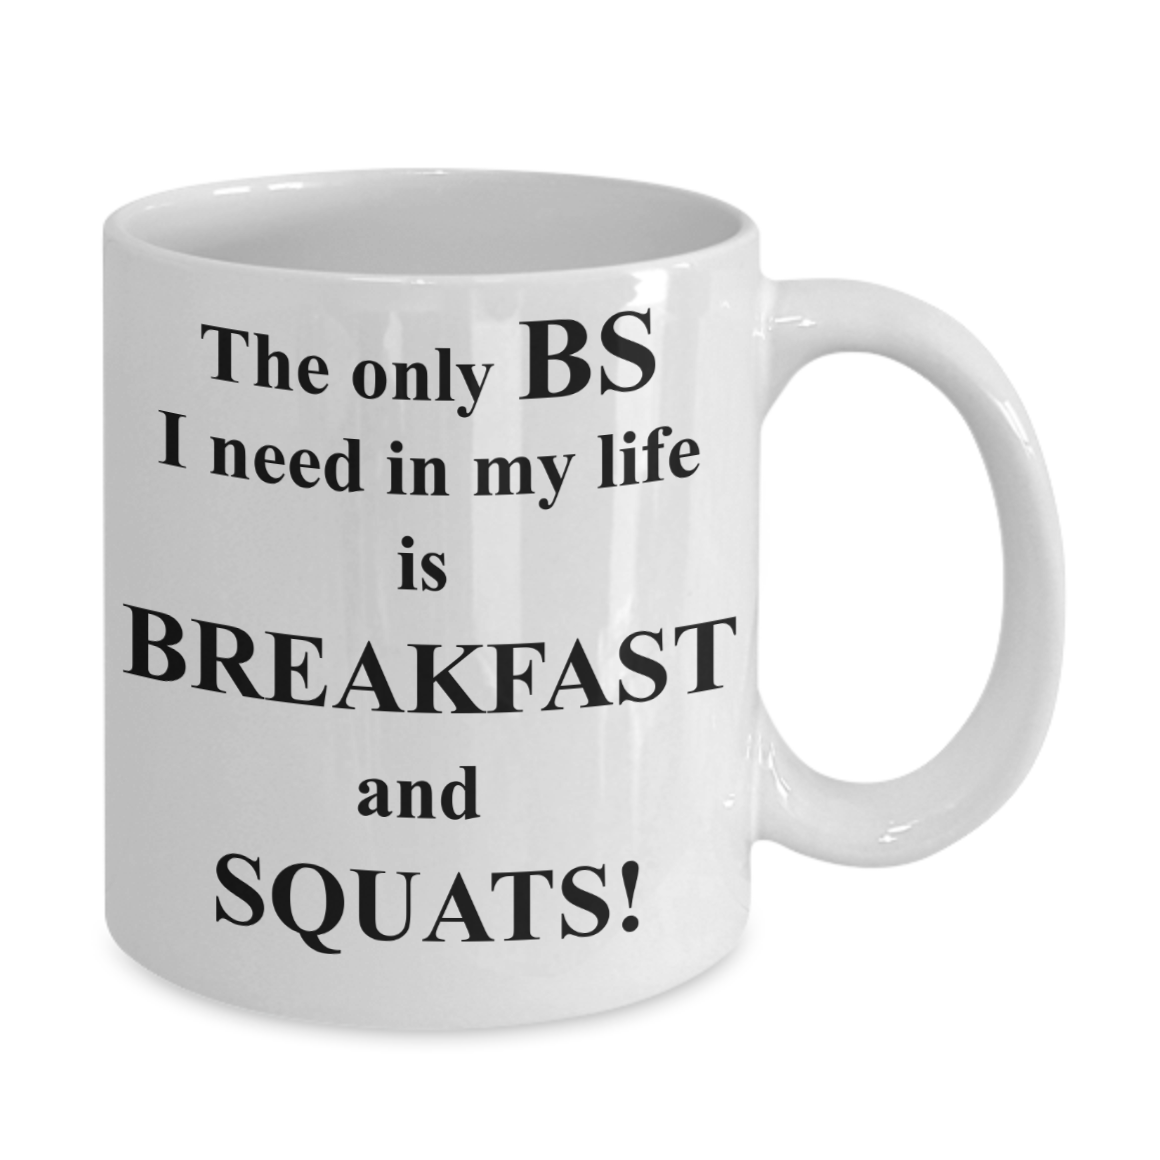 The only BS  - Inspirational Quotes Coffee Mug